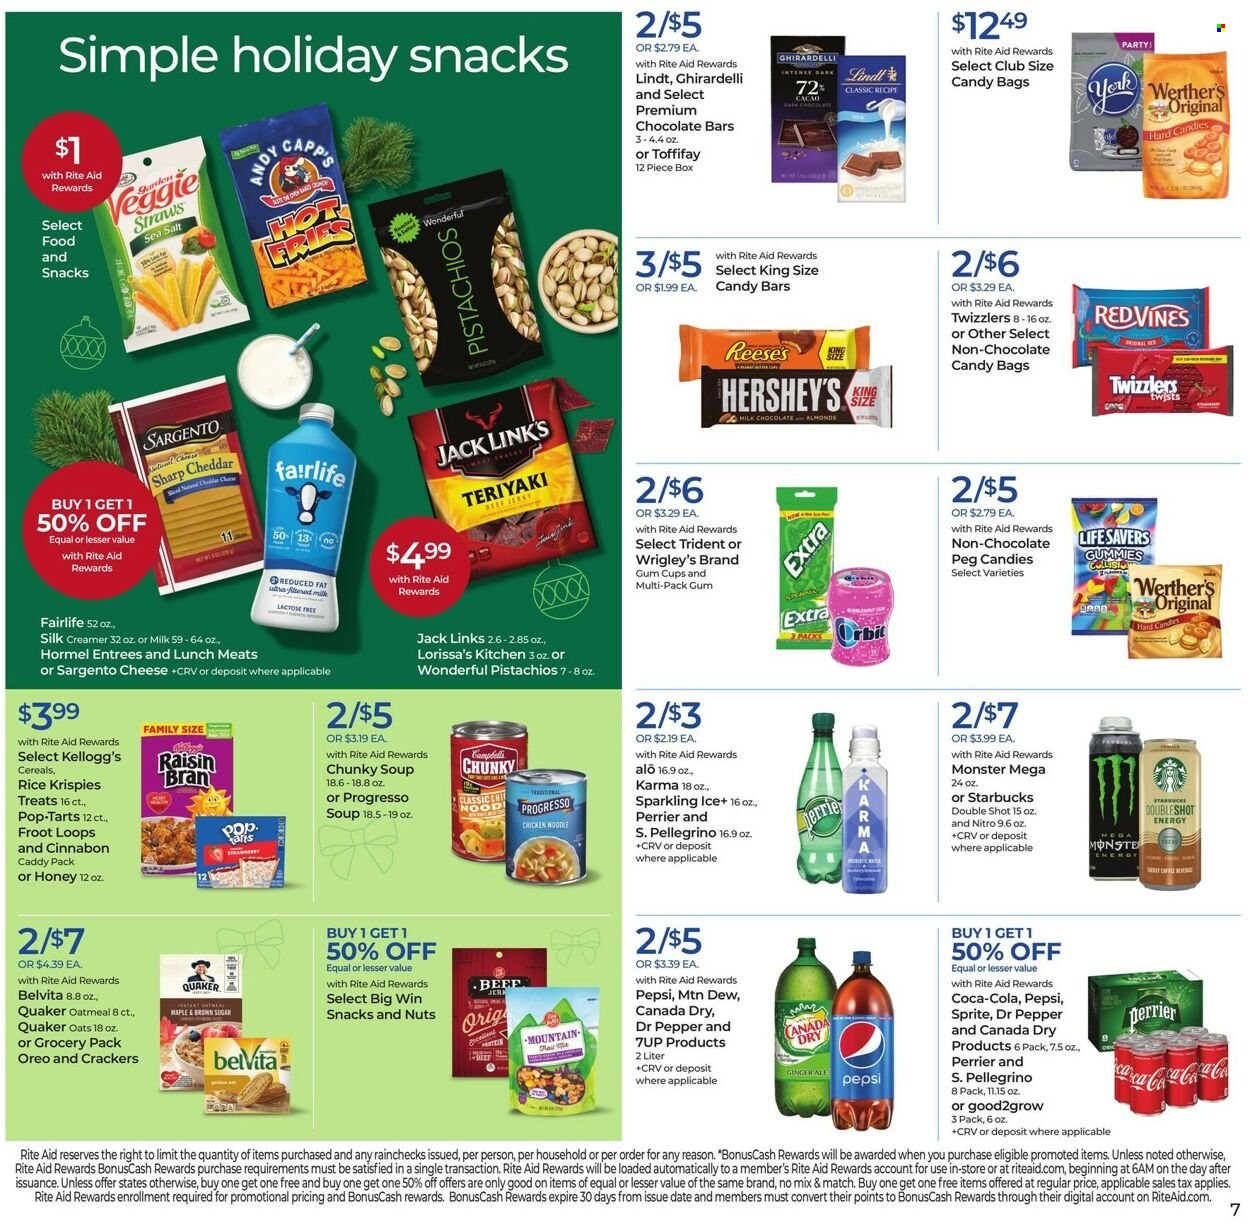 thumbnail - RITE AID Flyer - 11/27/2022 - 12/03/2022 - Sales products - Quaker, noodles, Progresso, Hormel, beef jerky, jerky, milk, Oreo, Silk, Reese's, Hershey's, Orbit, Lindt, crackers, Kellogg's, Trident, Pop-Tarts, Ghirardelli, chocolate candies, chocolate bar, Veggie Straws, Jack Link's, oatmeal, oats, cereals, Rice Krispies, Raisin Bran, belVita, pistachios, Canada Dry, Coca-Cola, ginger ale, Mountain Dew, Sprite, Pepsi, Monster, Dr. Pepper, 7UP, Perrier, San Pellegrino, coffee, Starbucks, cup. Page 14.